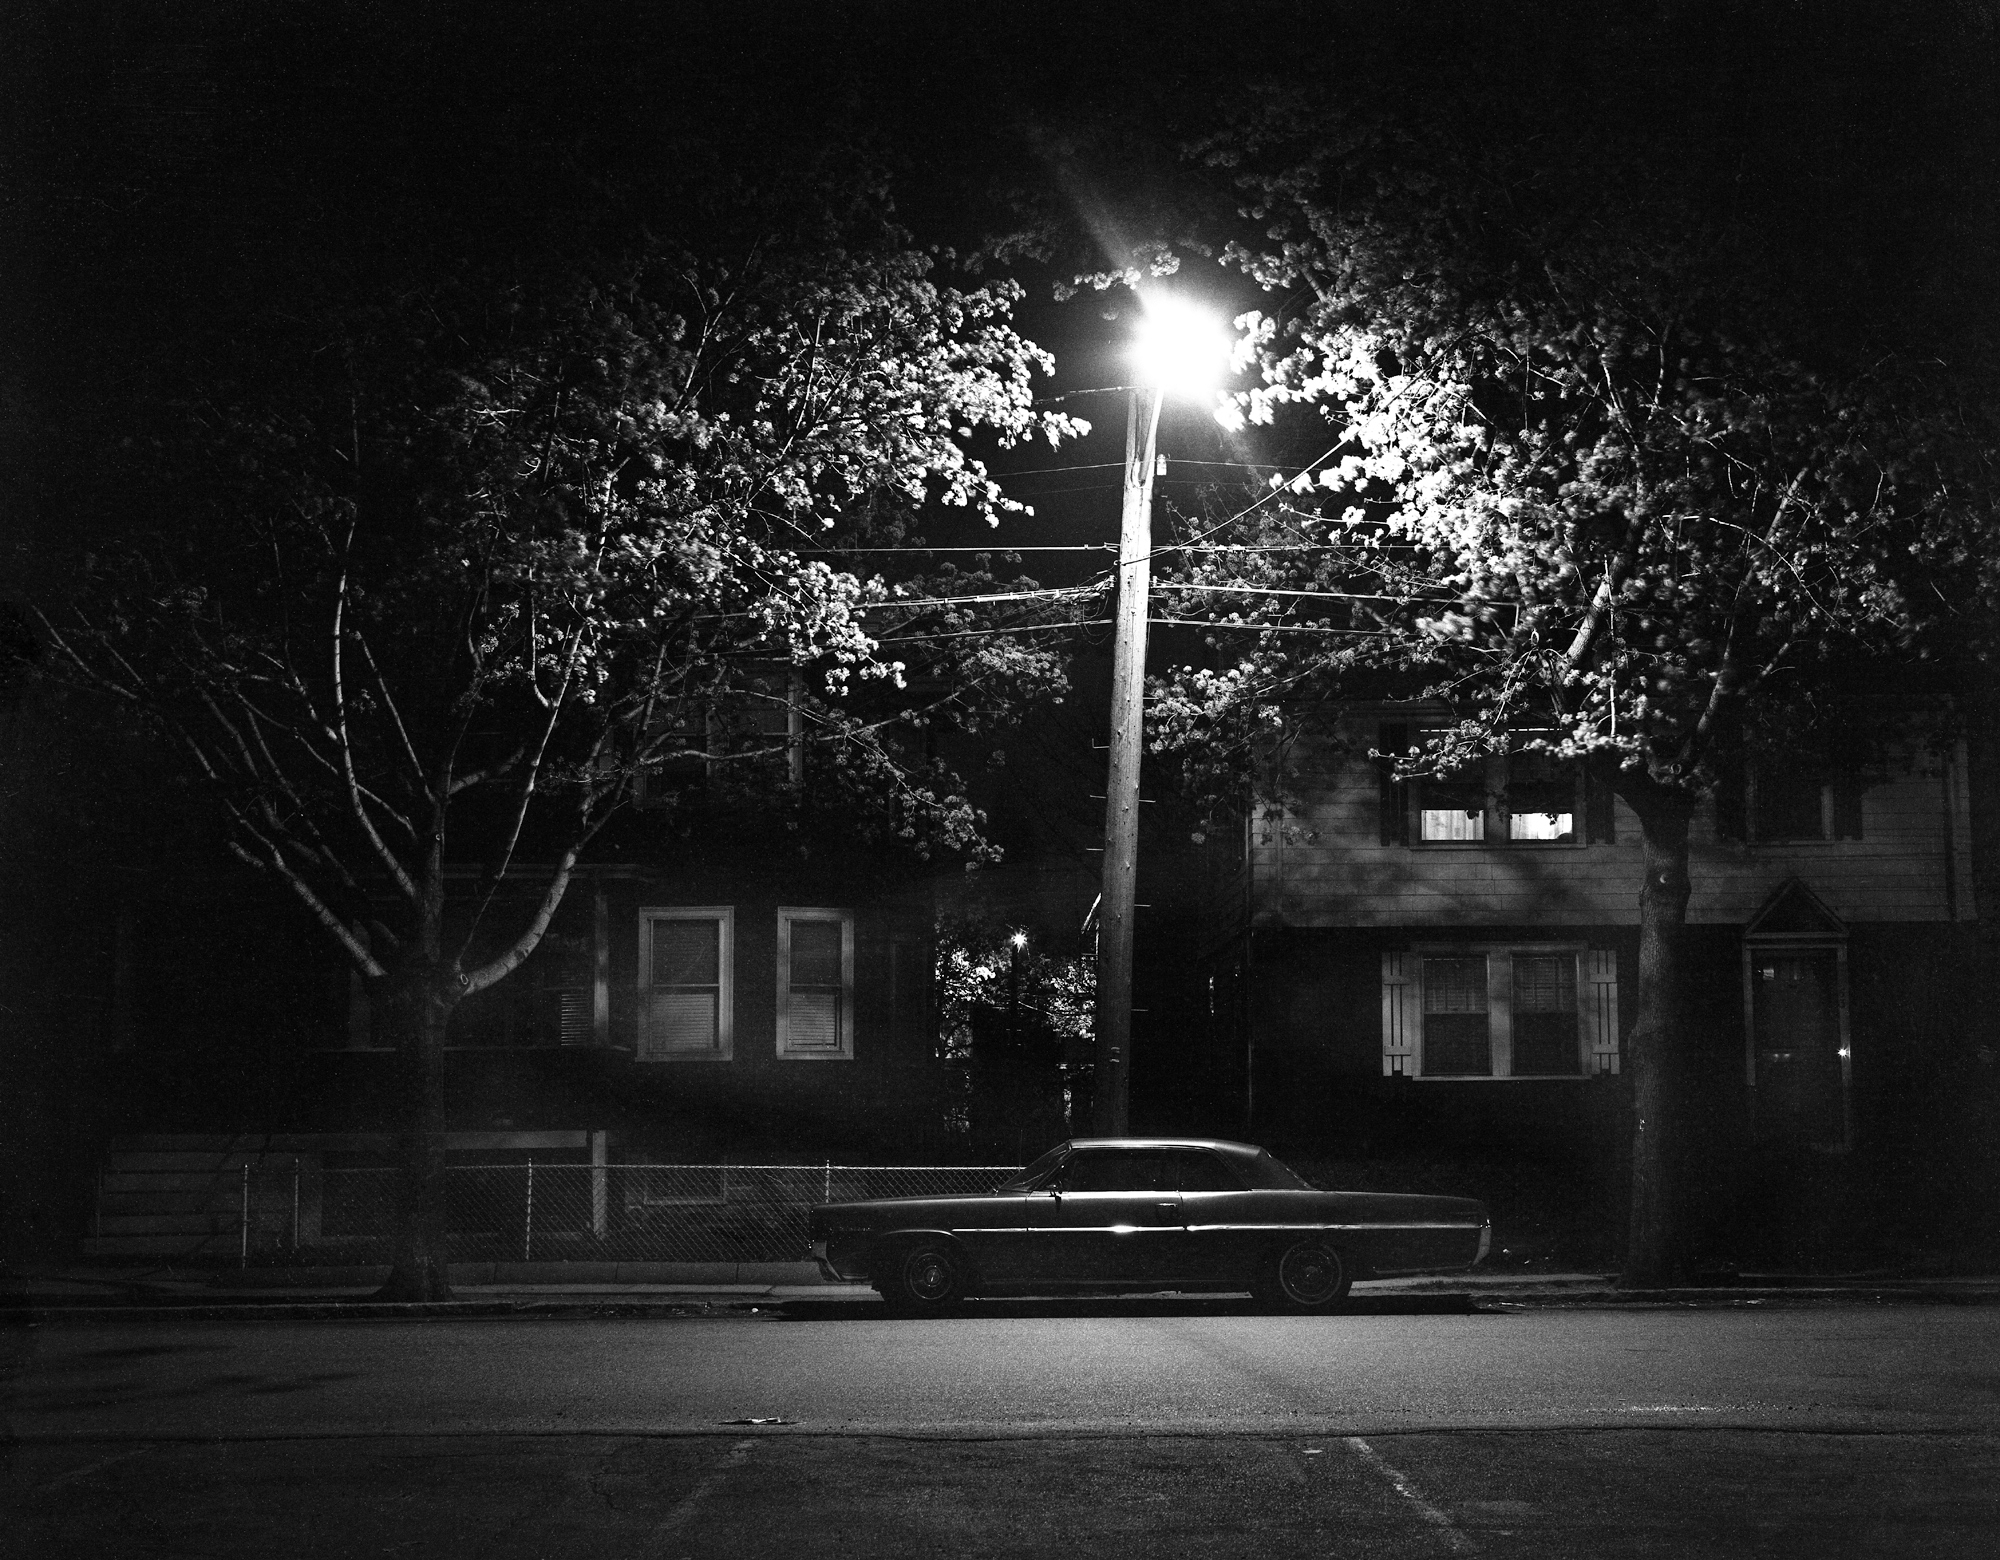 A very quiet night, after midnight in Medford, Massachusetts. Not sure of the make or year of the car. View full size.